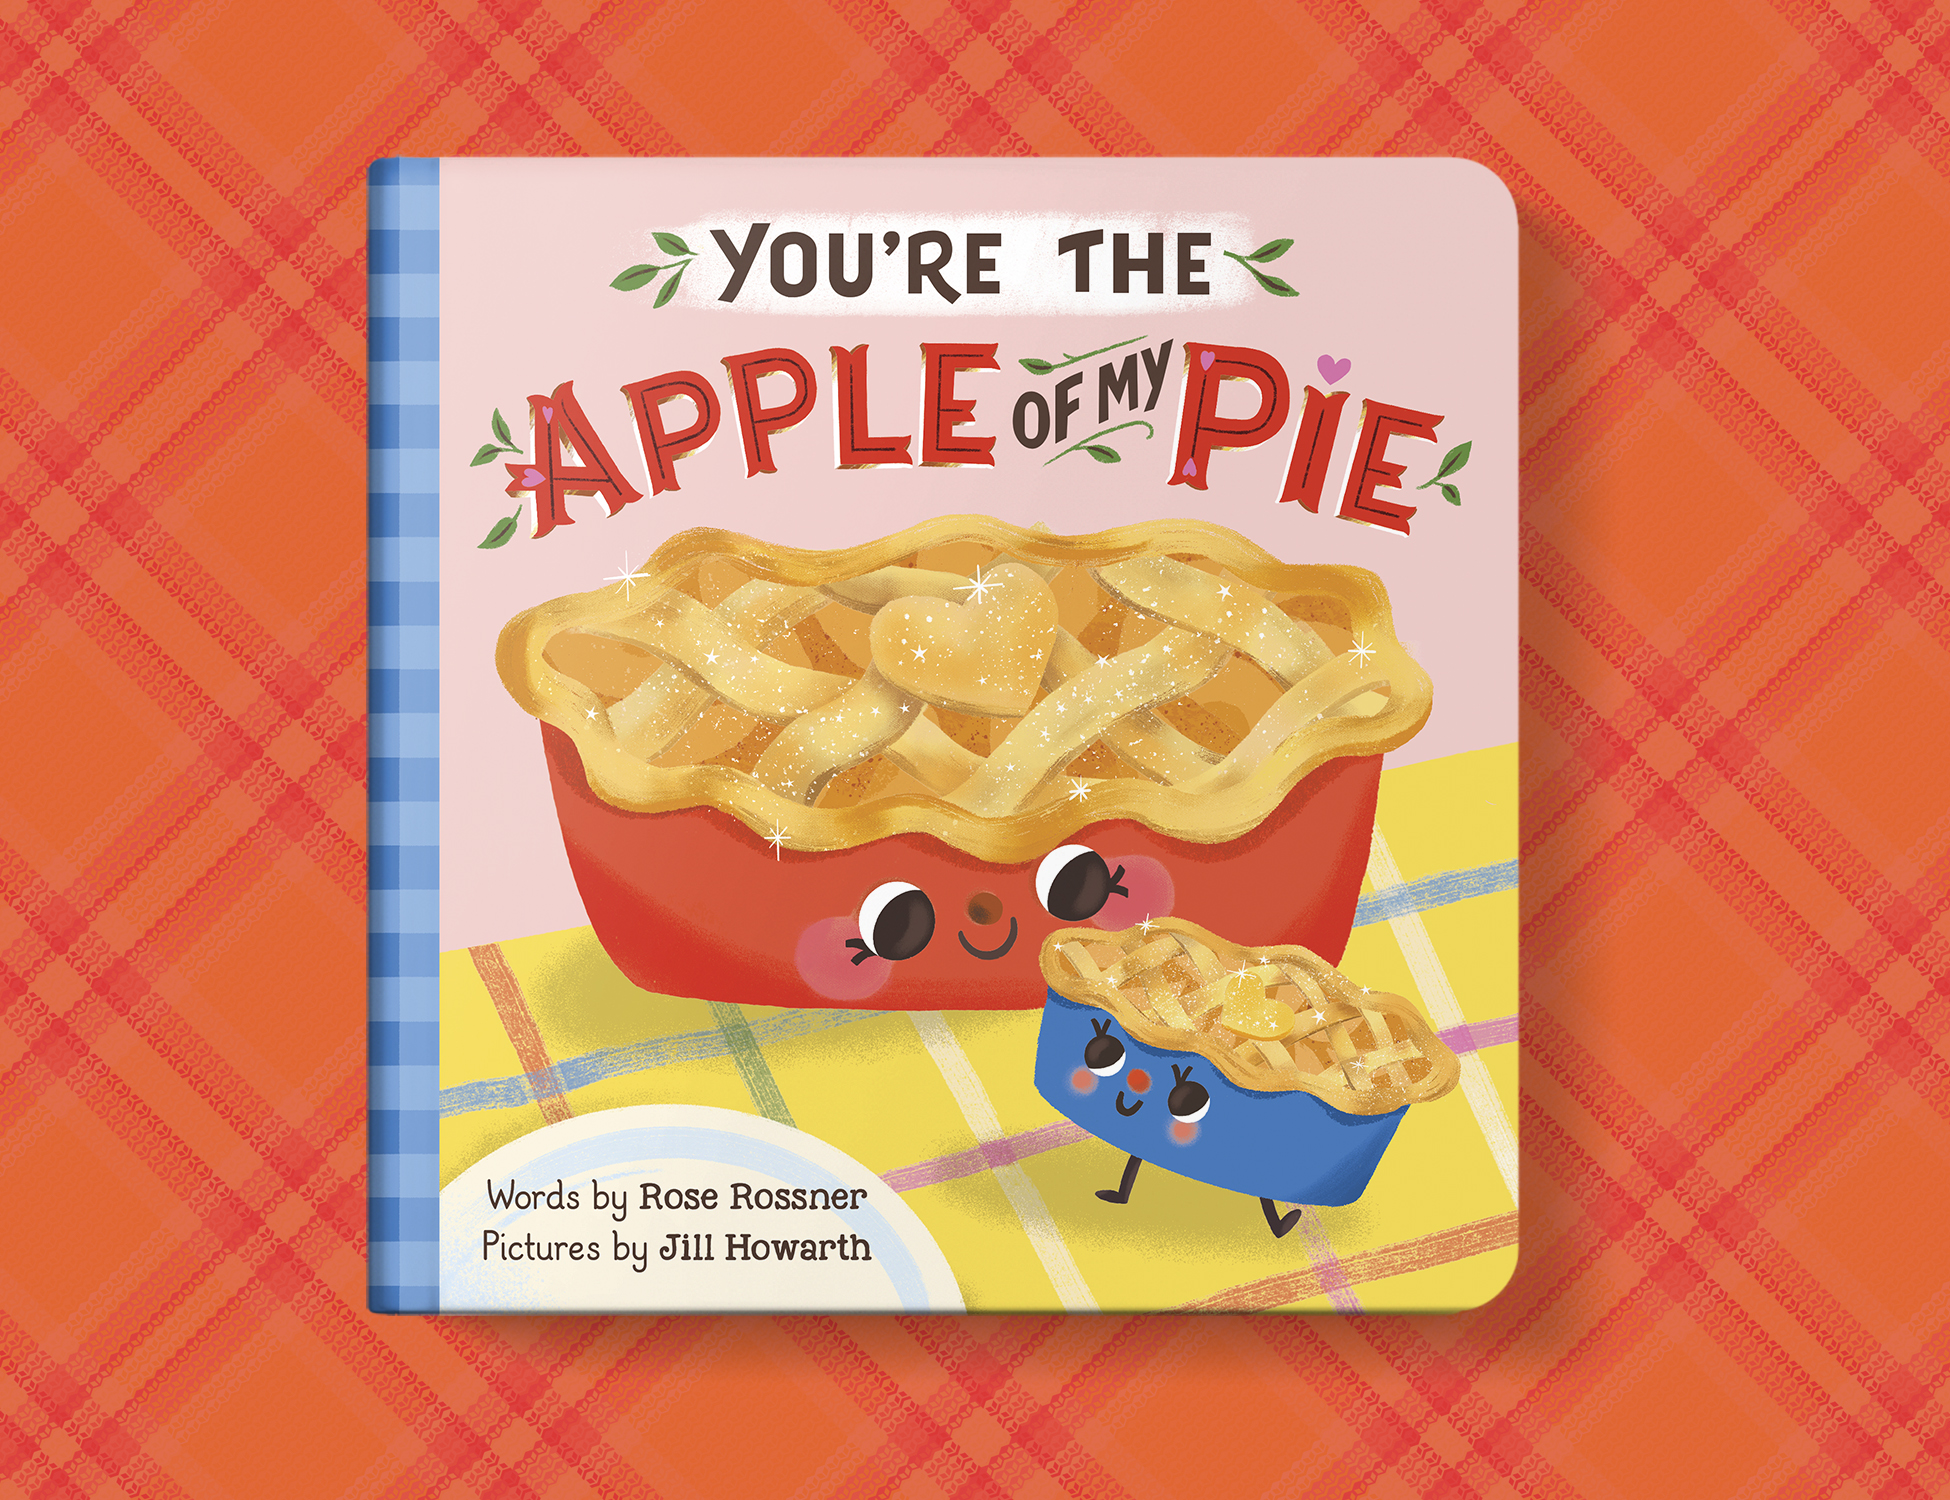 You're the Apple of My Pie